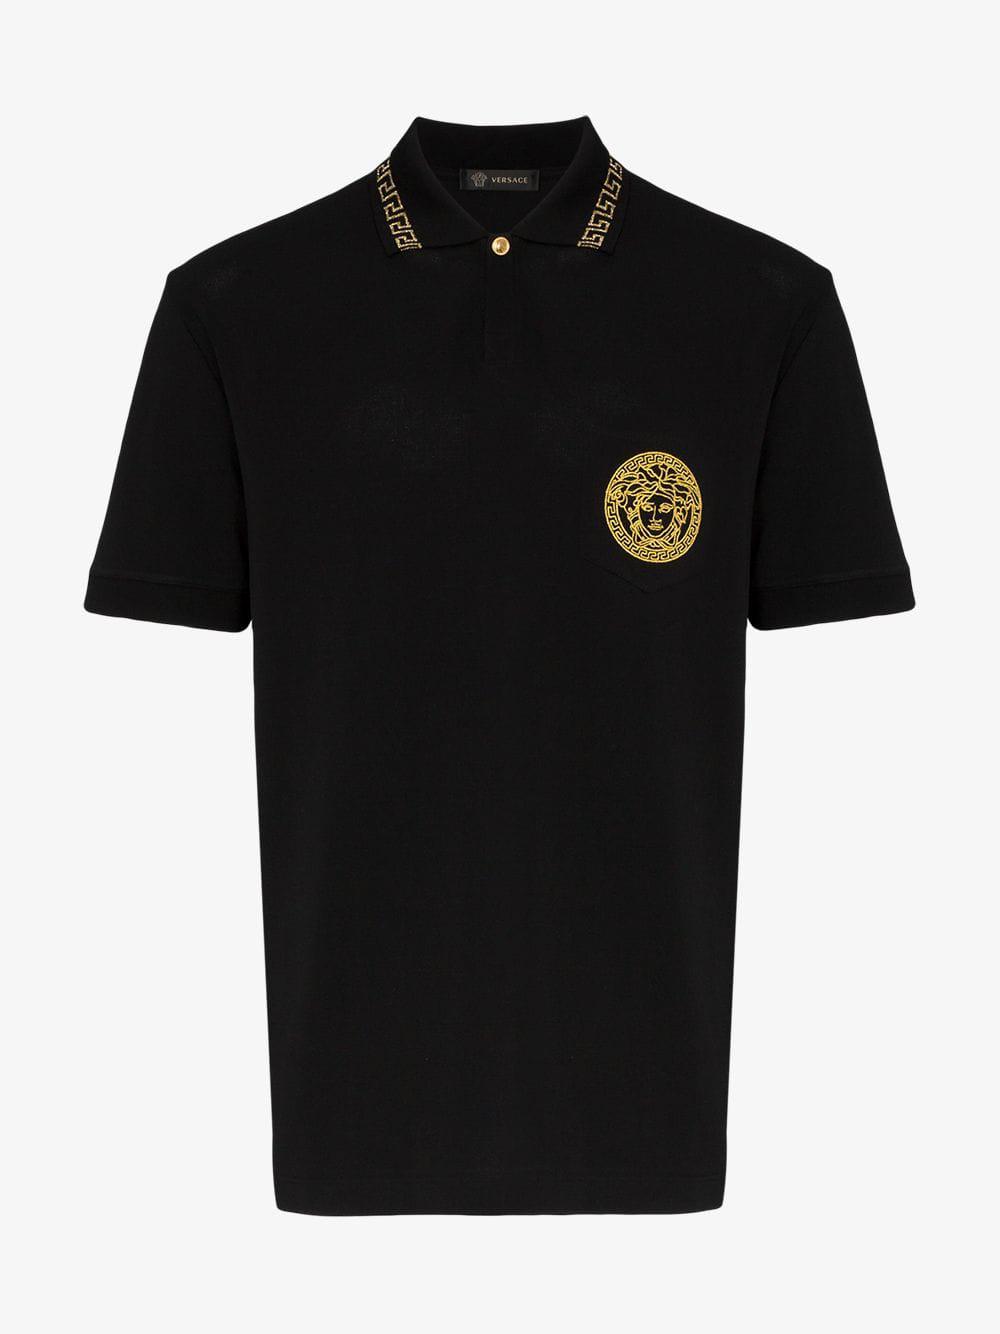 Versace Medusa Embroidered Cotton Polo Shirt in Black for Men - Lyst